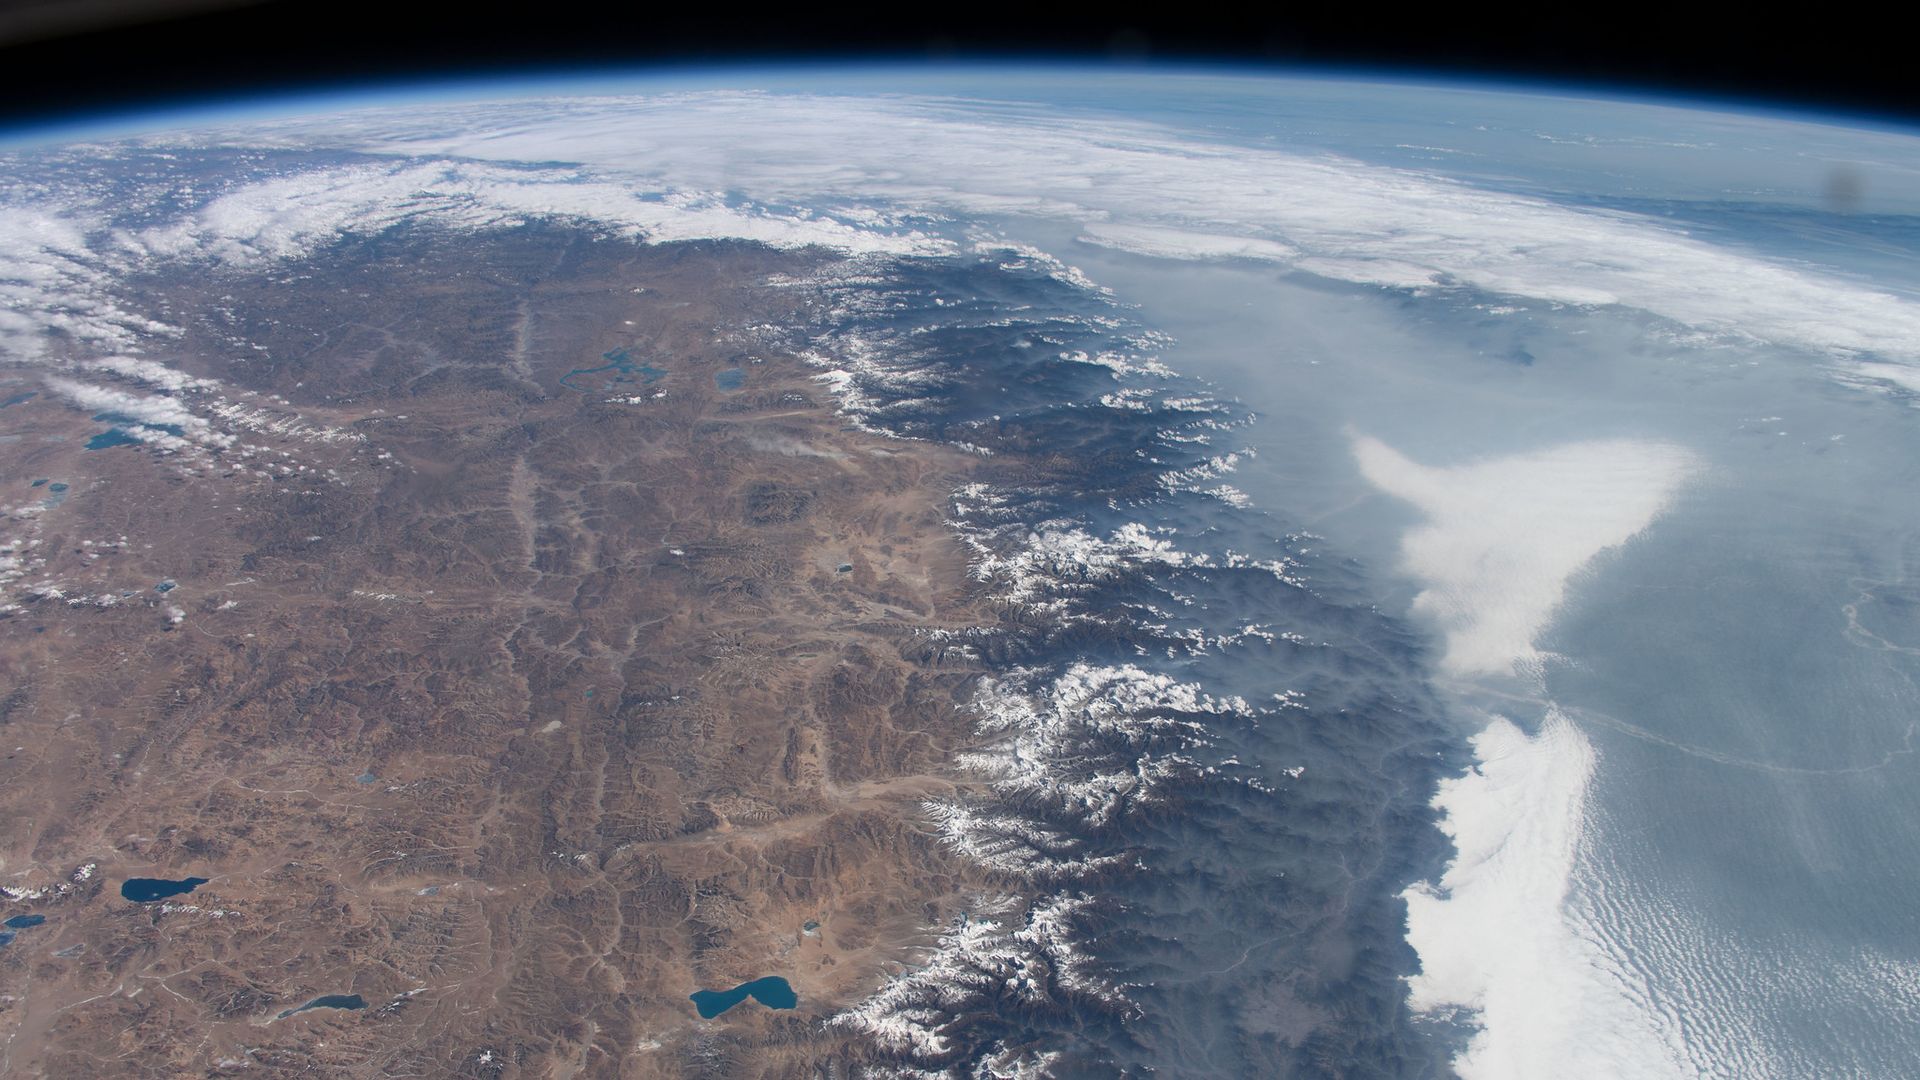 The snow-capped Himalayas seen from orbit.